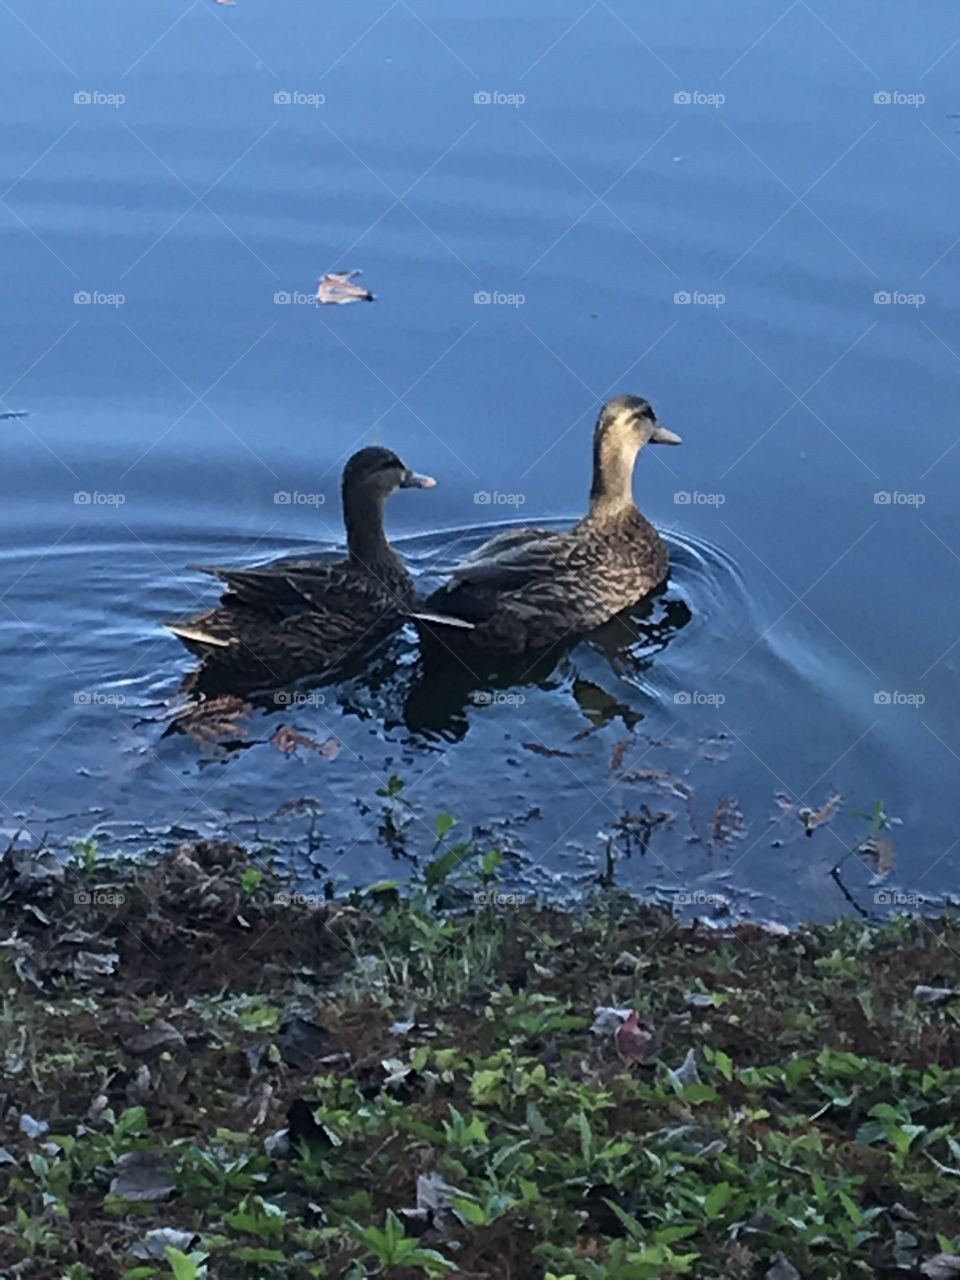 Lovers on the lake